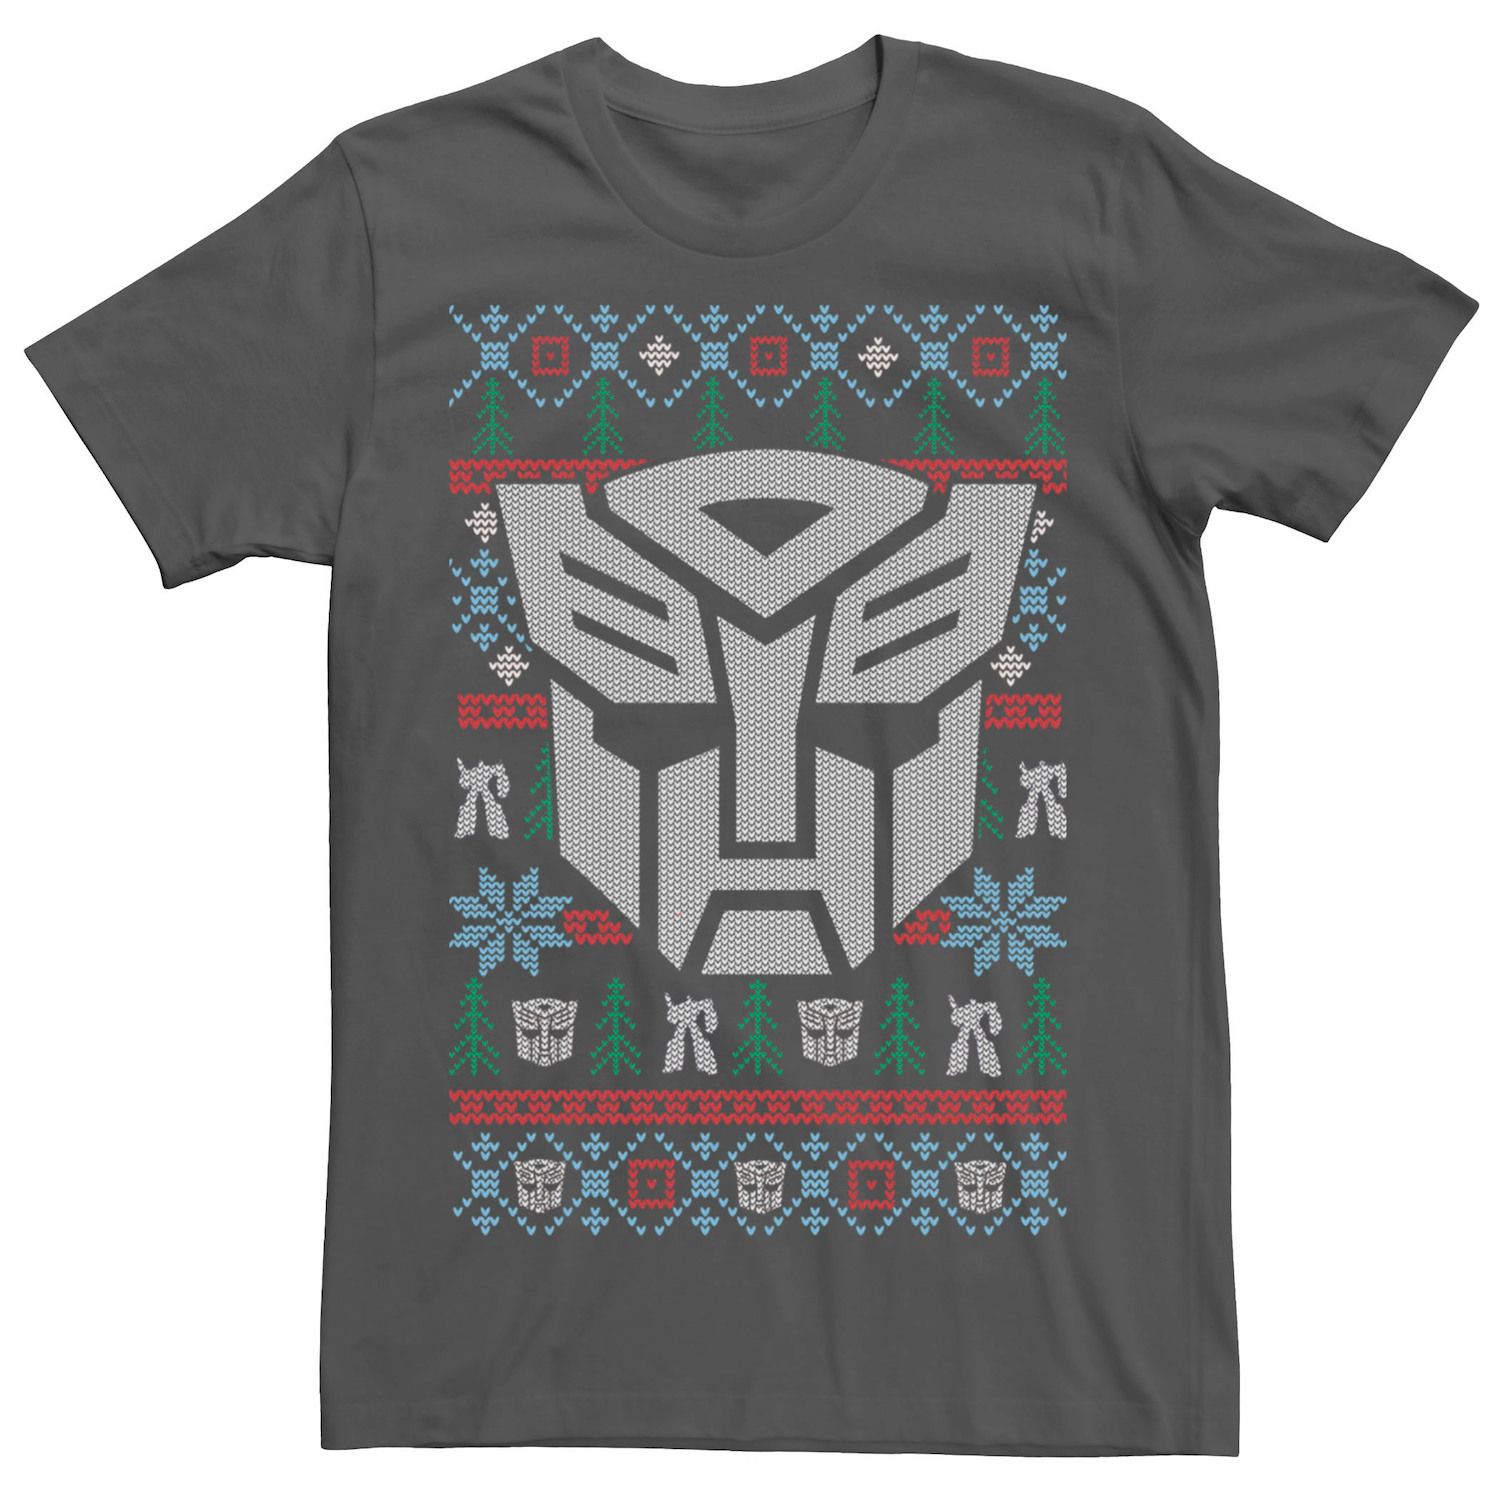 transformers christmas sweater